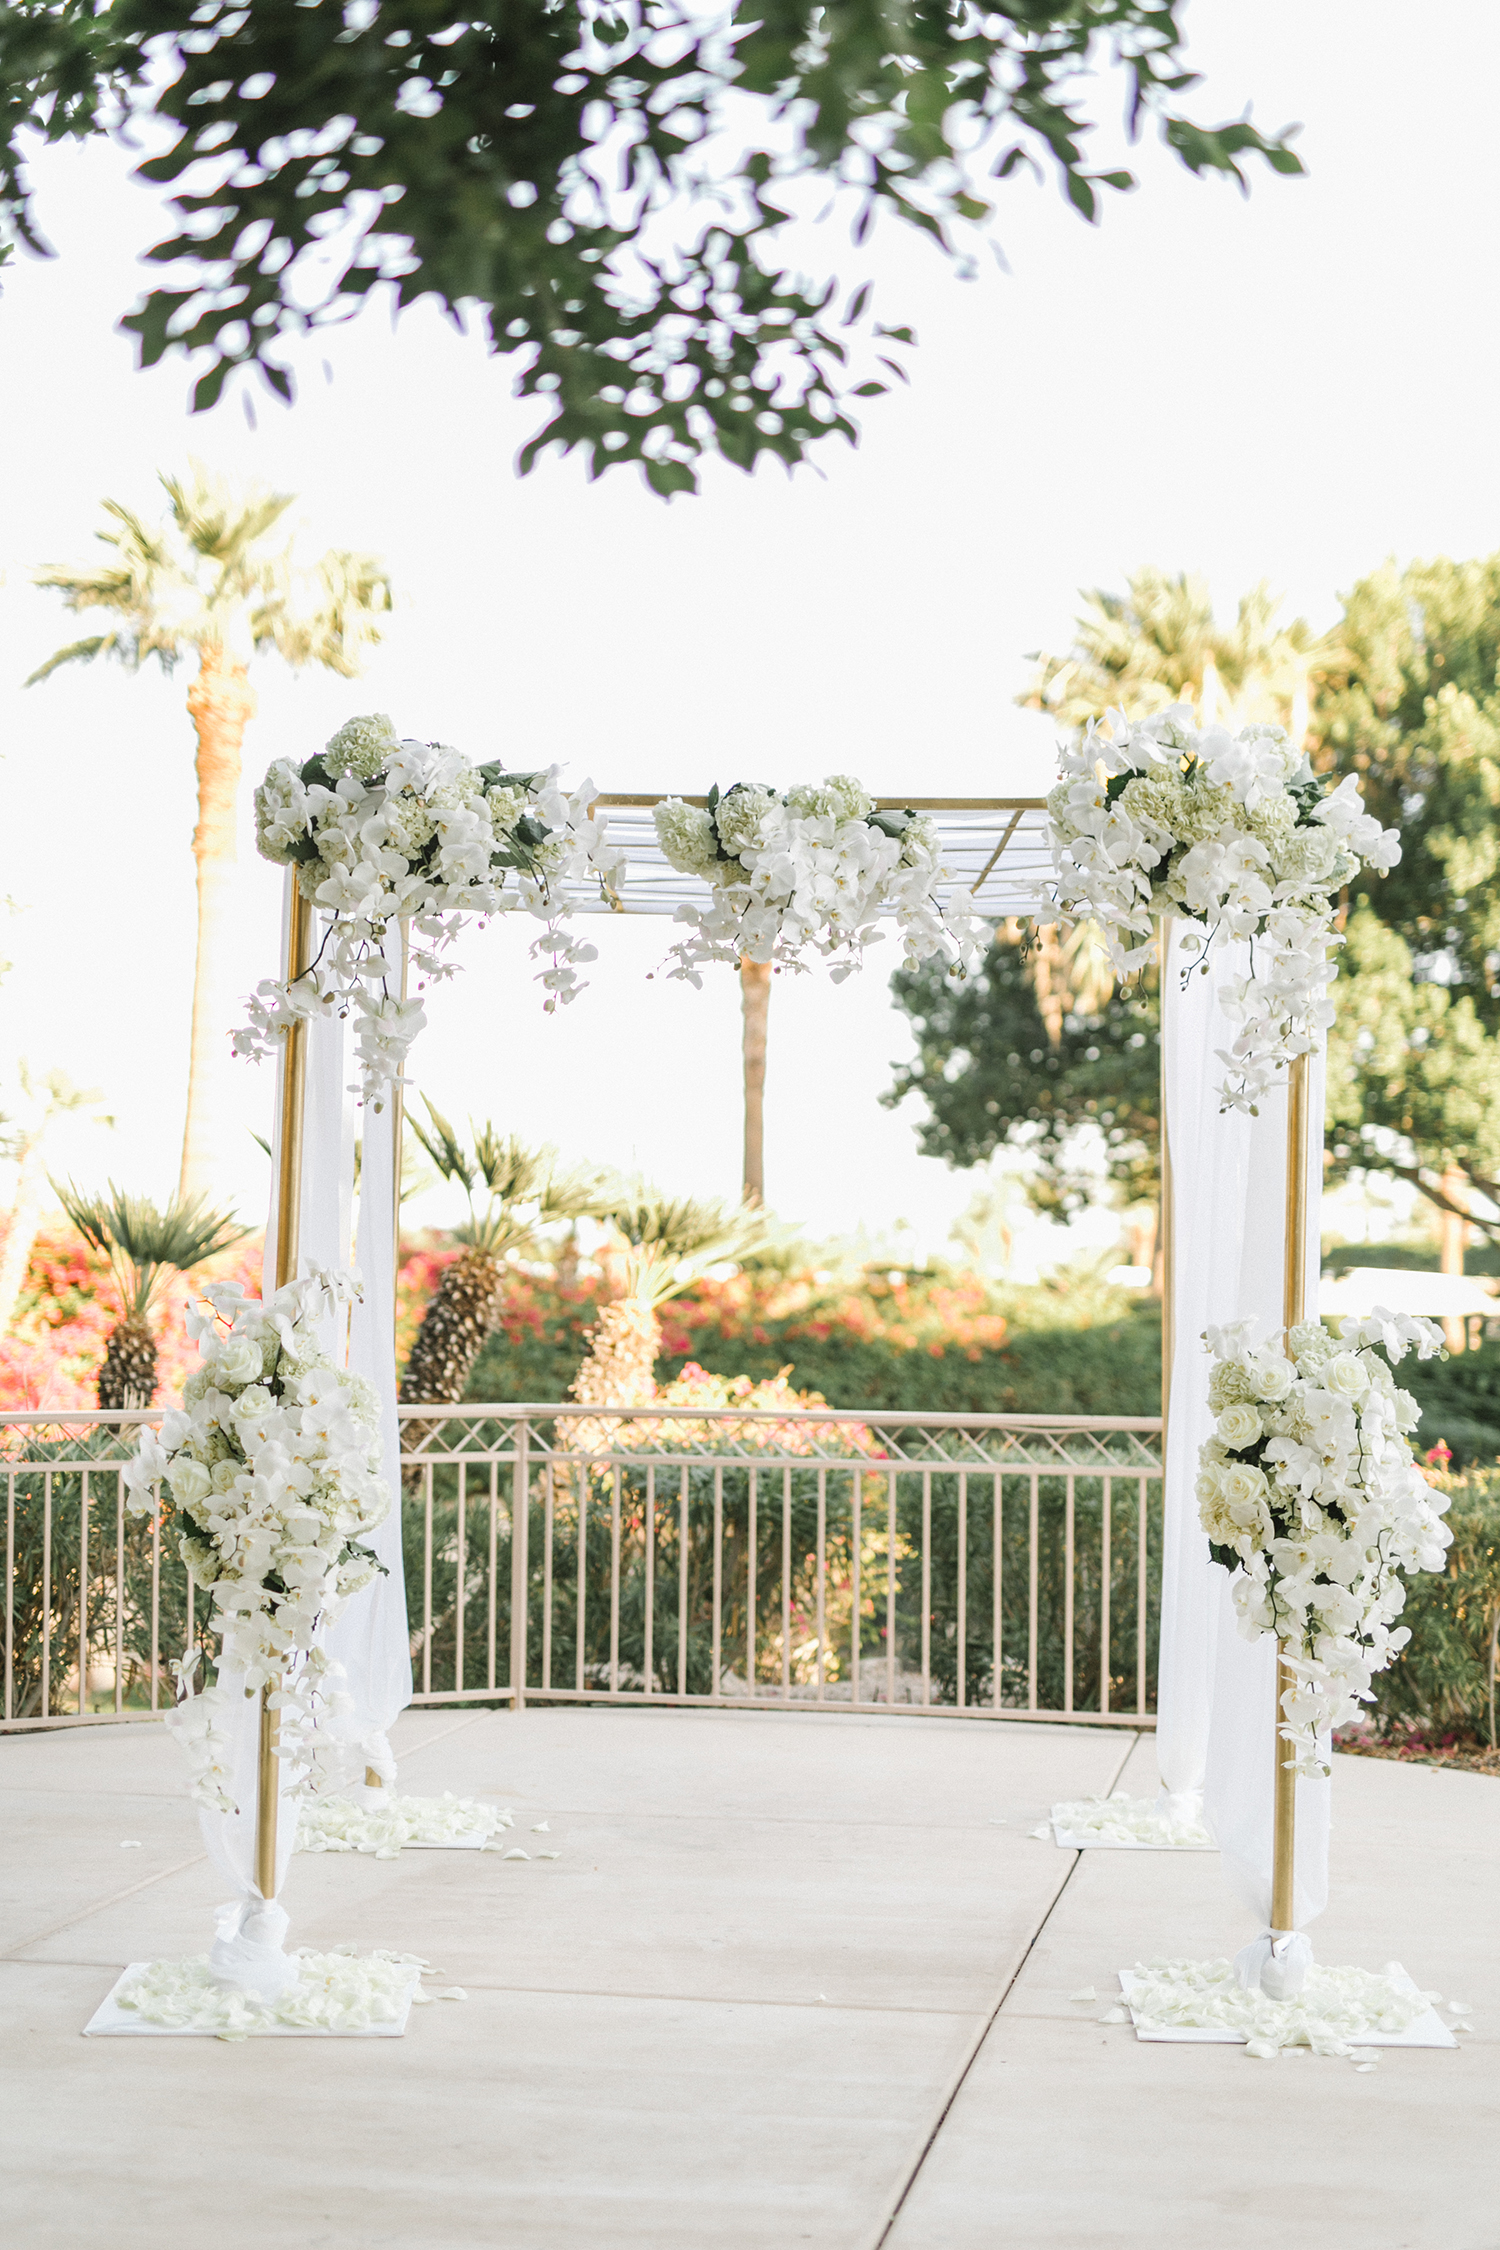 A Phoenician Resort Wedding in Arizona. Diana and Dan's big day was oozing elegance in every moment and detail. Catch Part One of their wedding | KatinaPhotography.com #PhoenicianWedding #ThePhoenicianResort #PhoenicianResort #ScottsdaleArizona #ScottsdaleArizonaWedding #ScottsdaleArizonaWeddingVenues #ArizonaWeddingPhotographer #WeddingPhotographyInspiration #WeddingStylingIdeas #ArizonaWeddingIdeas #ArizonaWeddingPhotography #WeddingIdeas #WeddingDecorations #WeddingDress #ArizonaWedding #ArizonaPhotographer #WeddingFlorals #WeddingCeremonyDecorIdeas